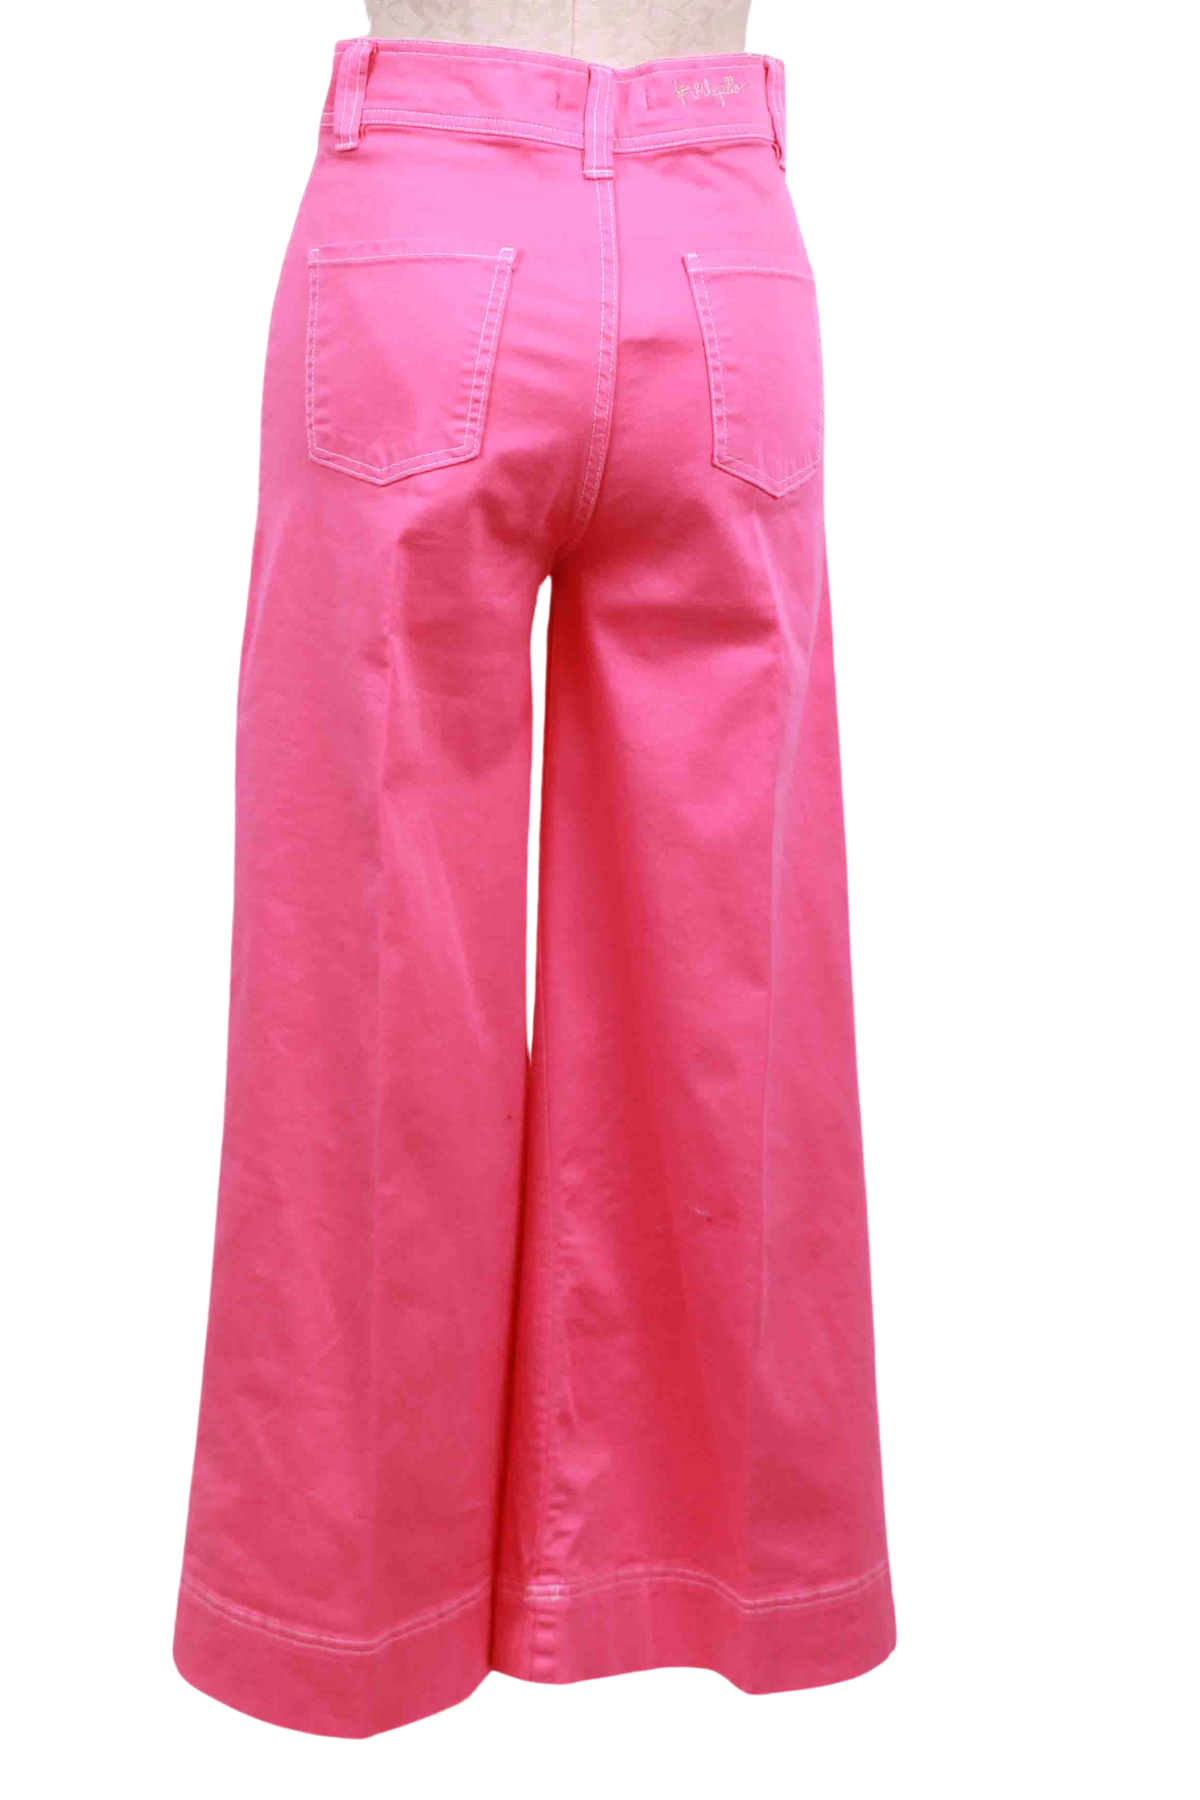 back view of Noa Pink Trouser by Vilagallo